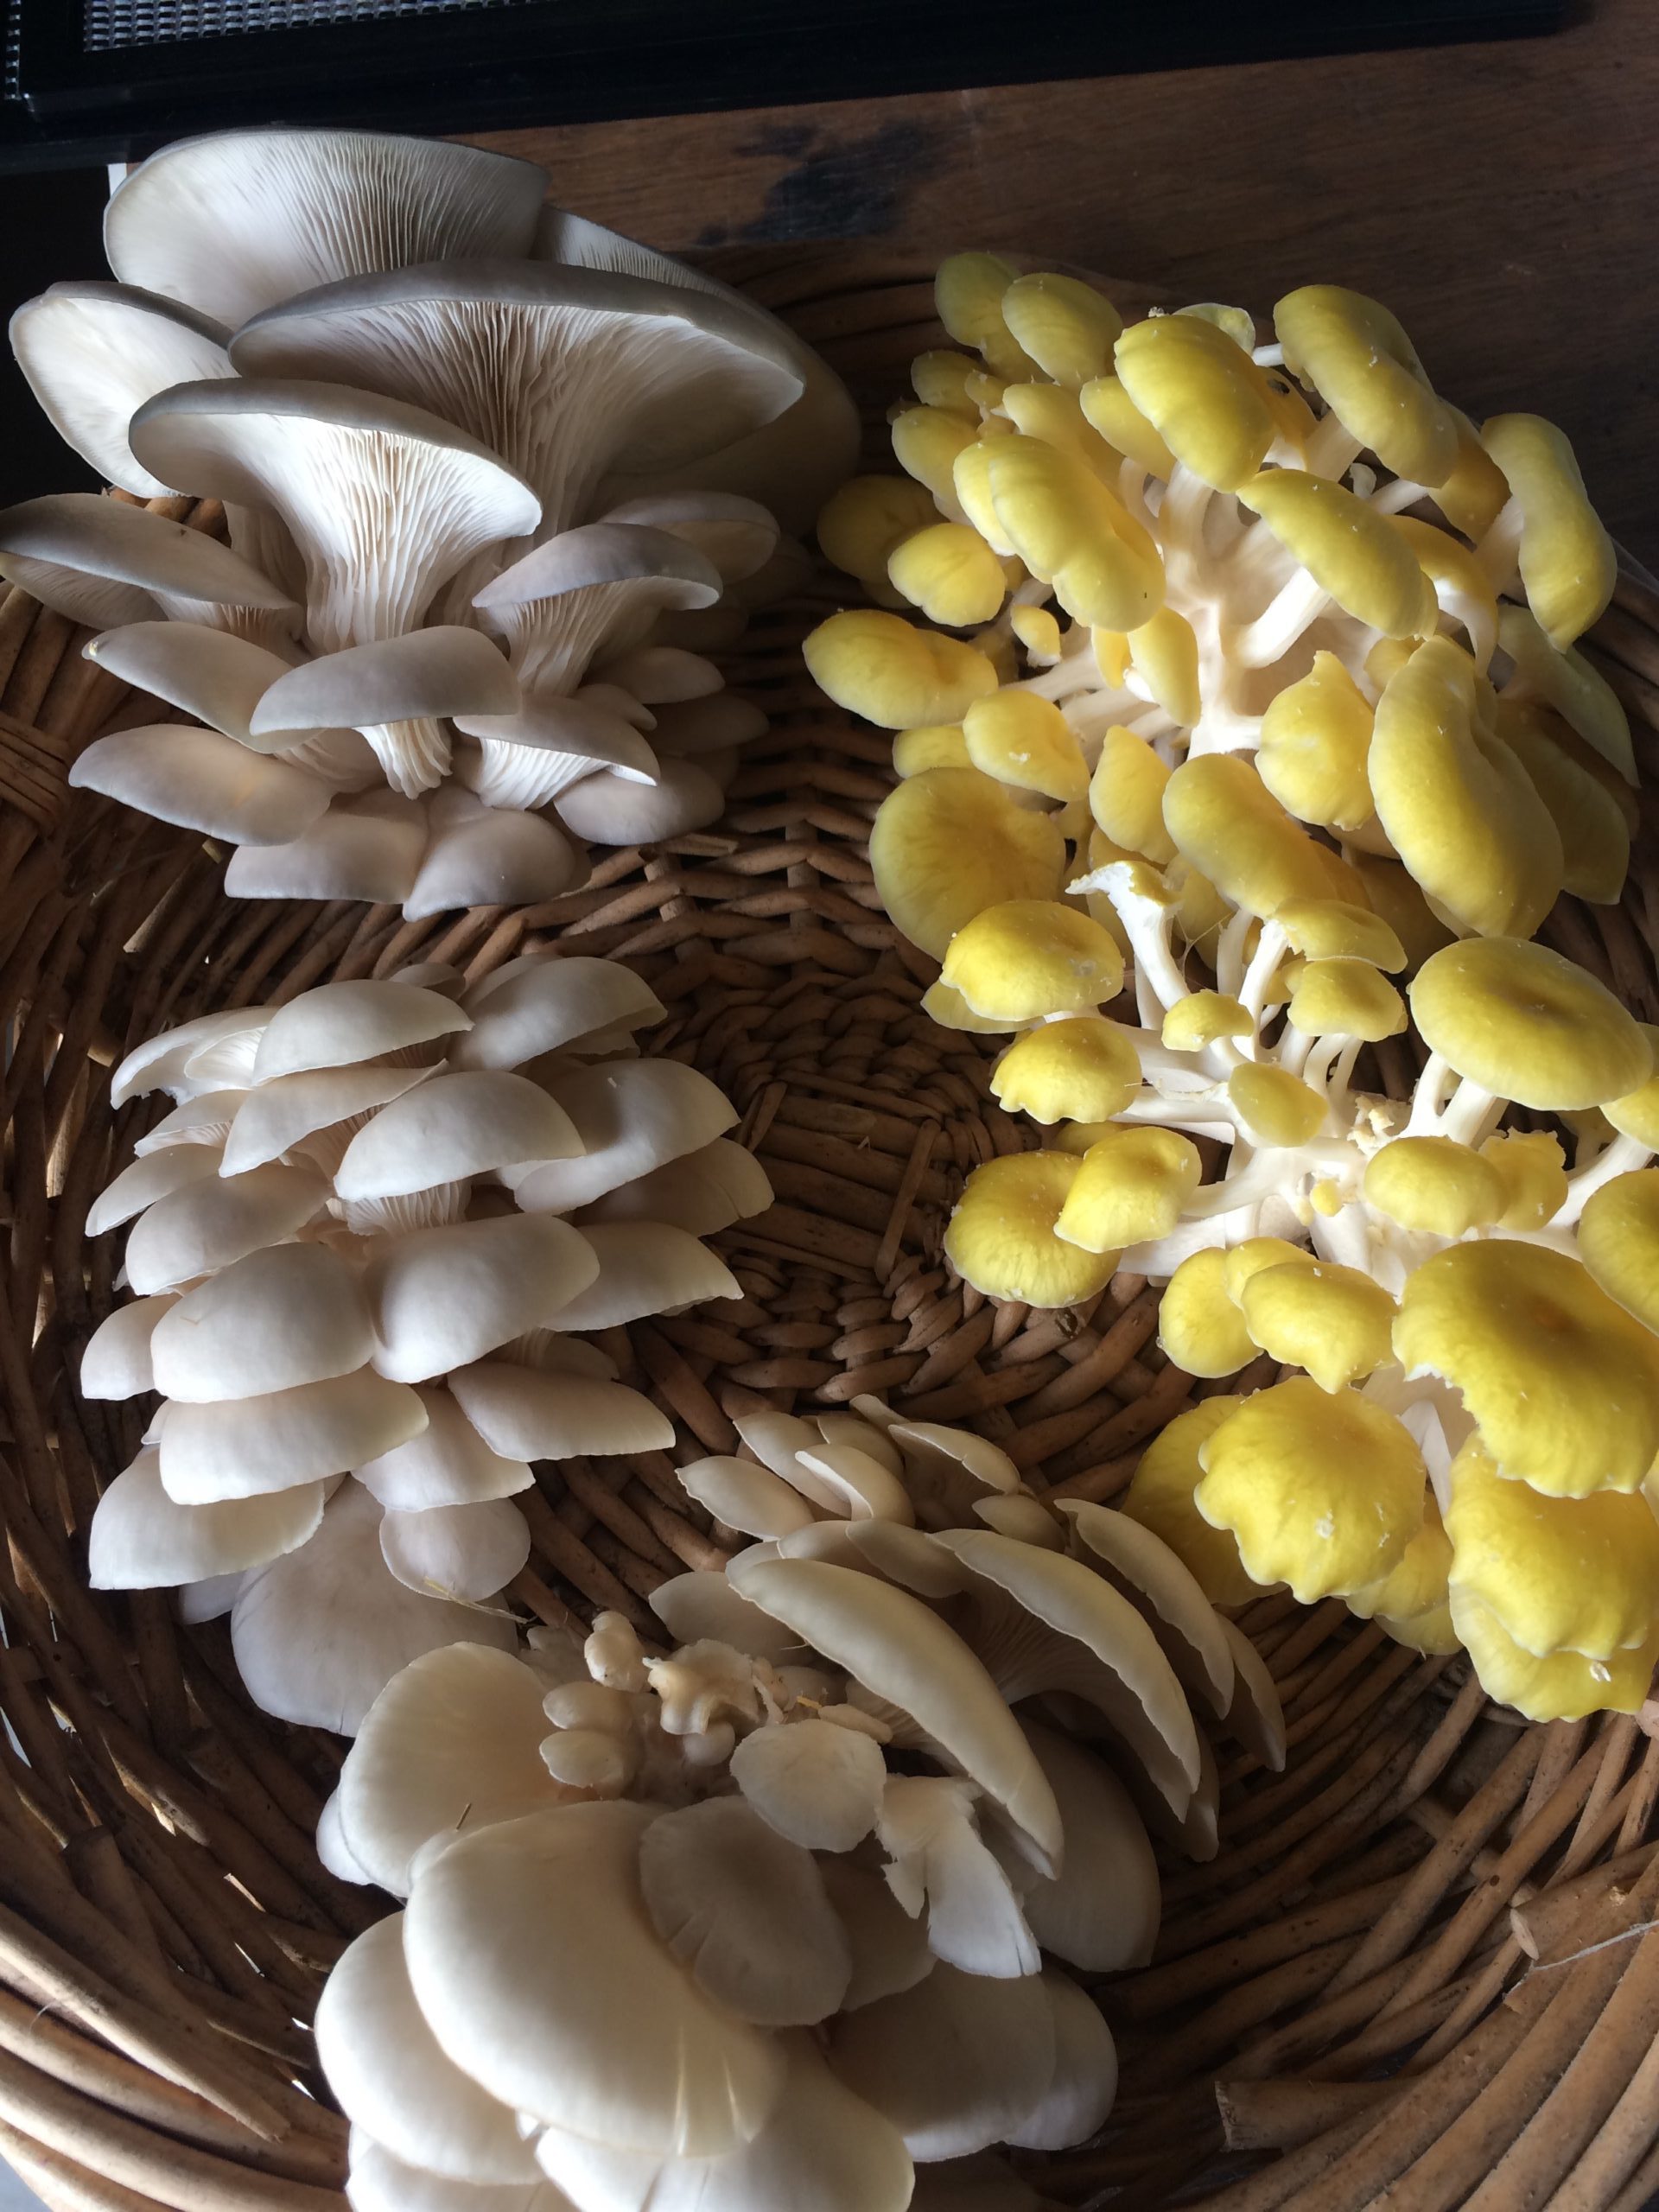 Oyster mushrooms should be harvested when they are still supple and with a small curled edge.